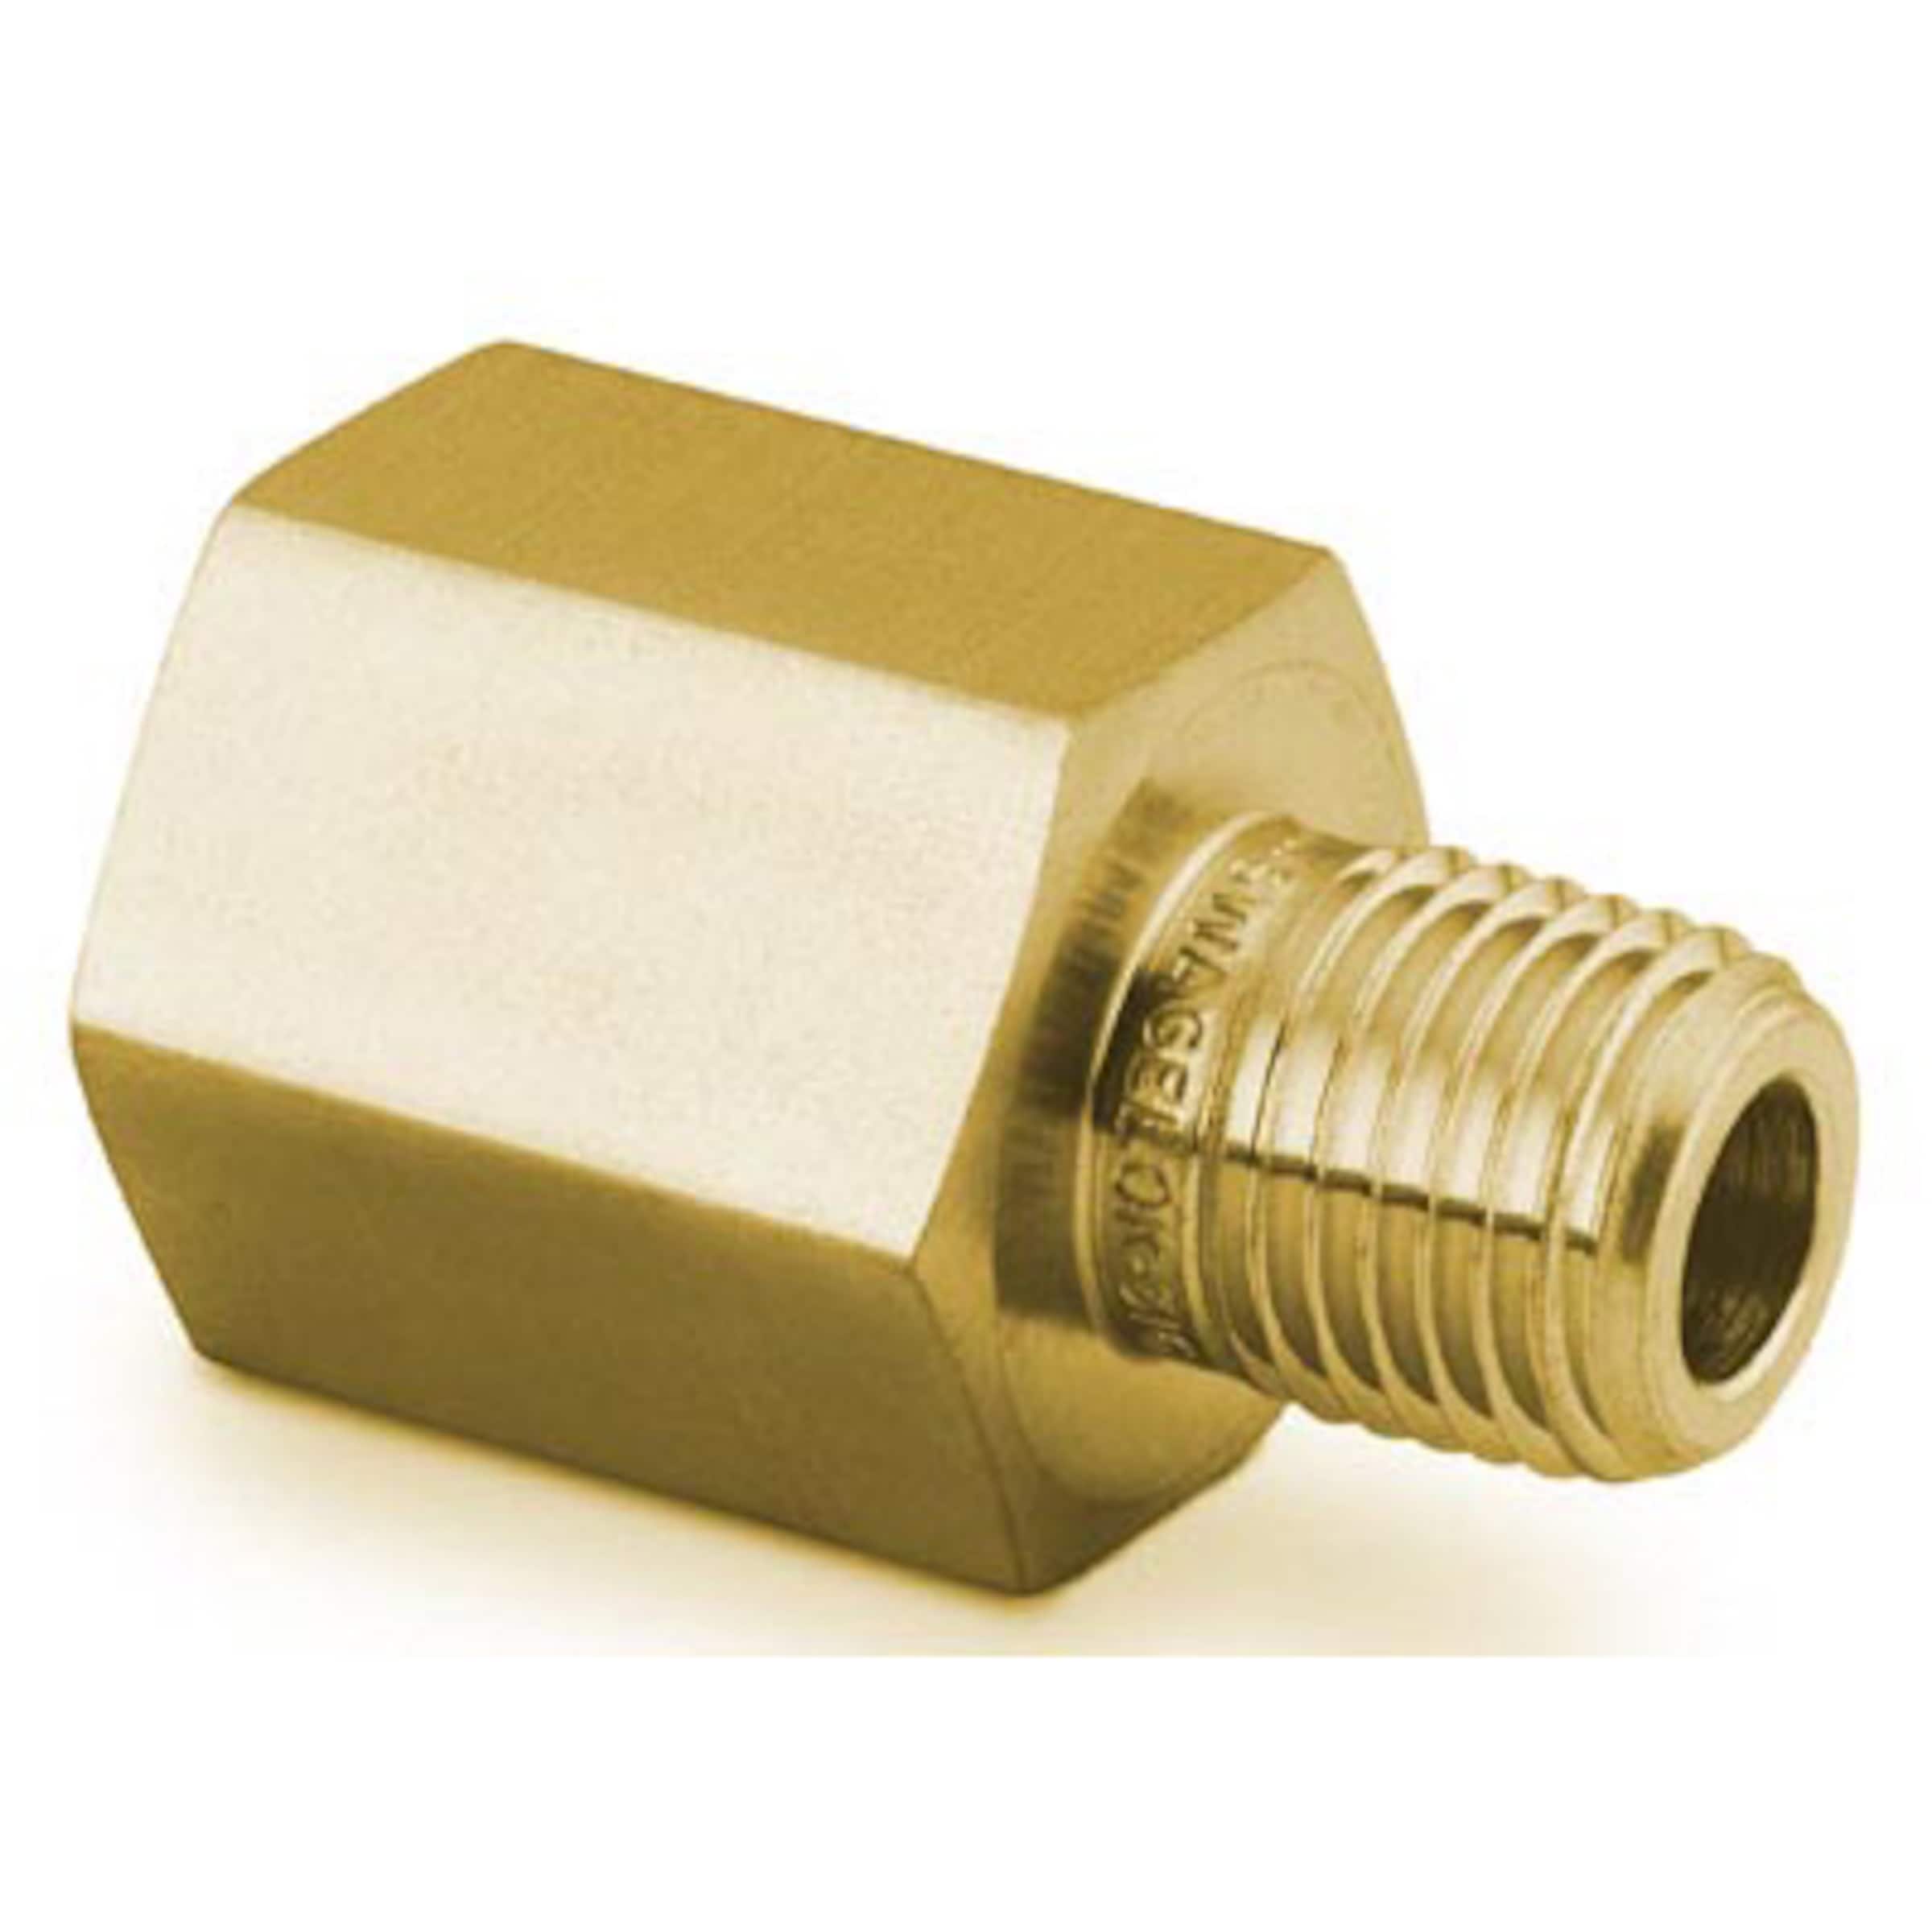 Brass Pipe Fitting, Adapter, 1/2 PT Male x 1/2 PT Female Connector 